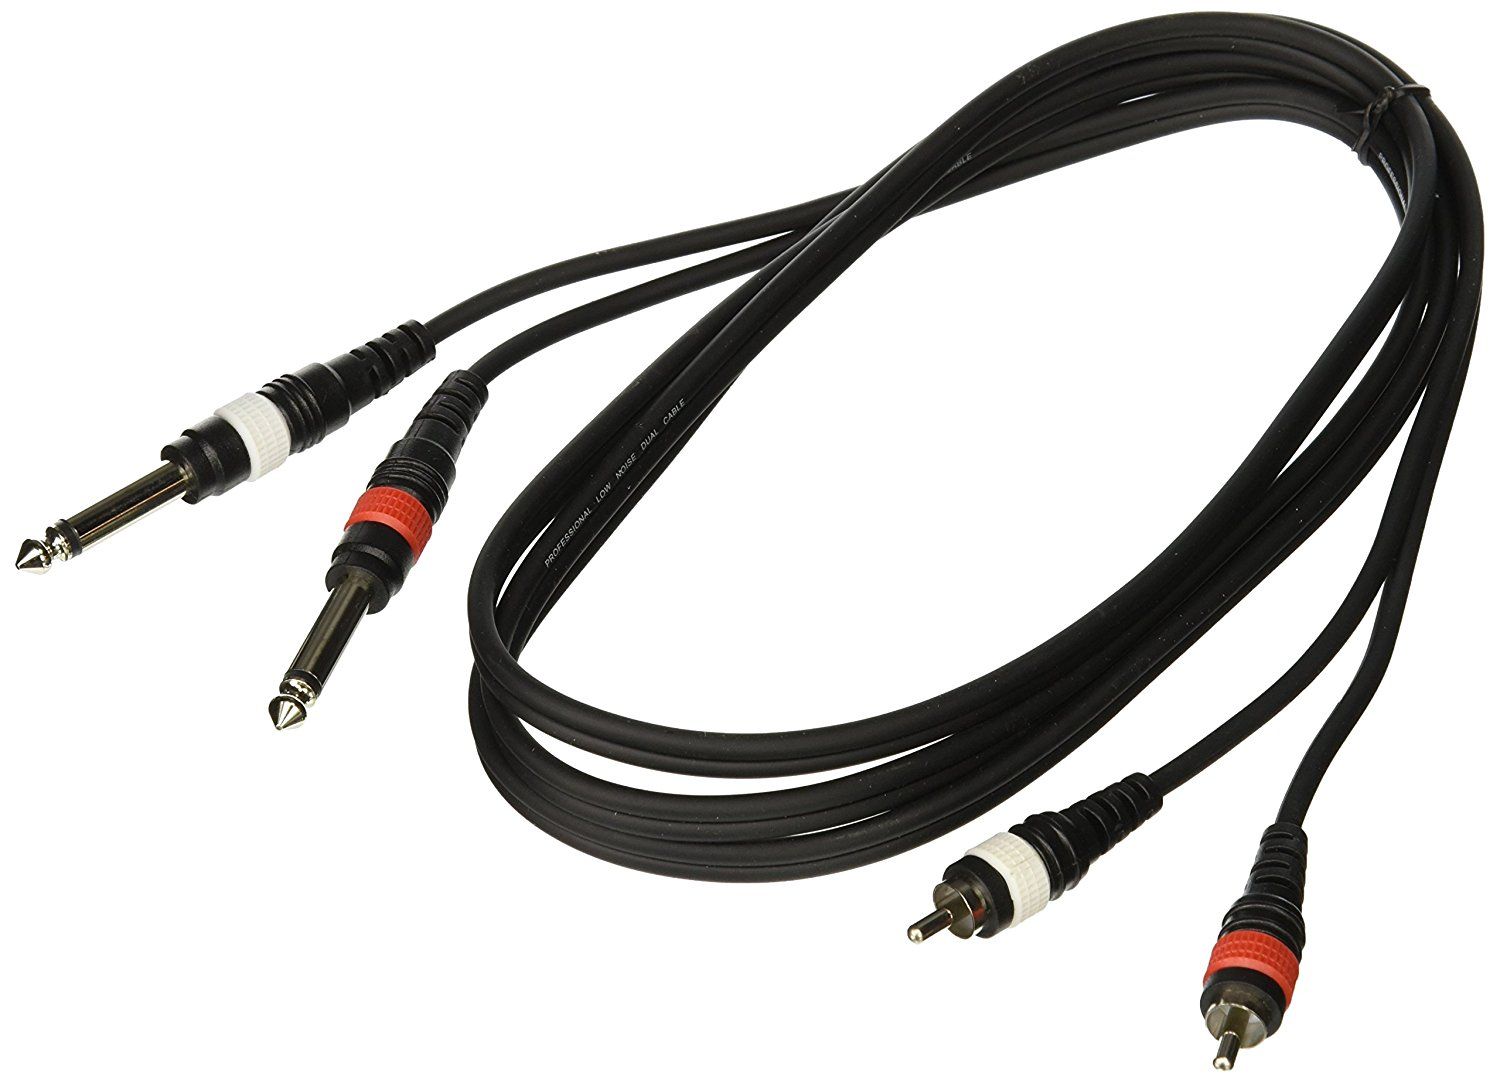 Mr. Dj CDQR6 6-Feet 1/4-Inch Dual Mono to Dual RCA Male Speaker Cable - image 1 of 1